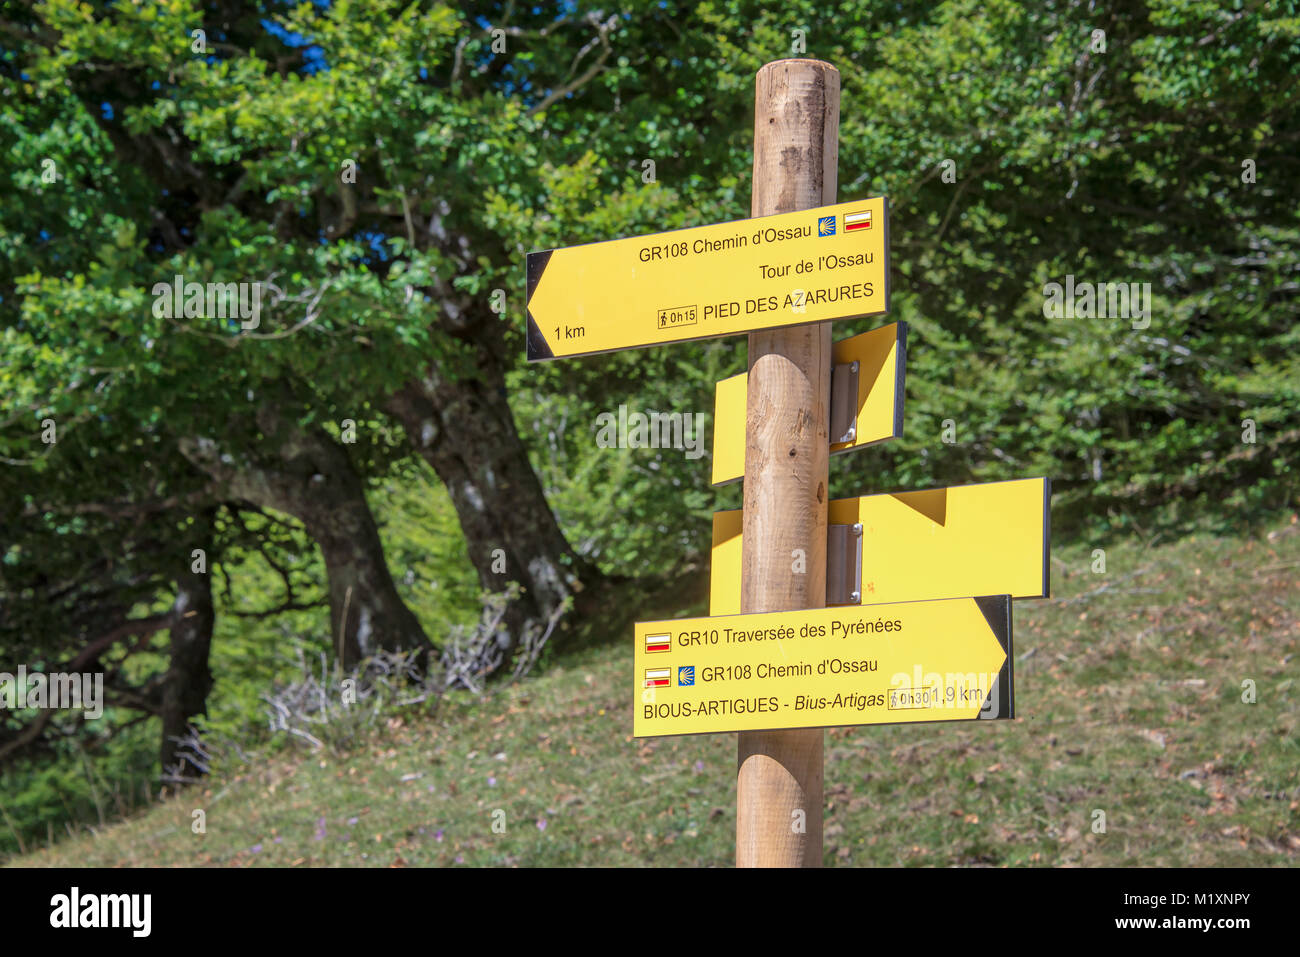 Hiking direction sign, Ossau Valley, Pyrenees, France Stock Photo